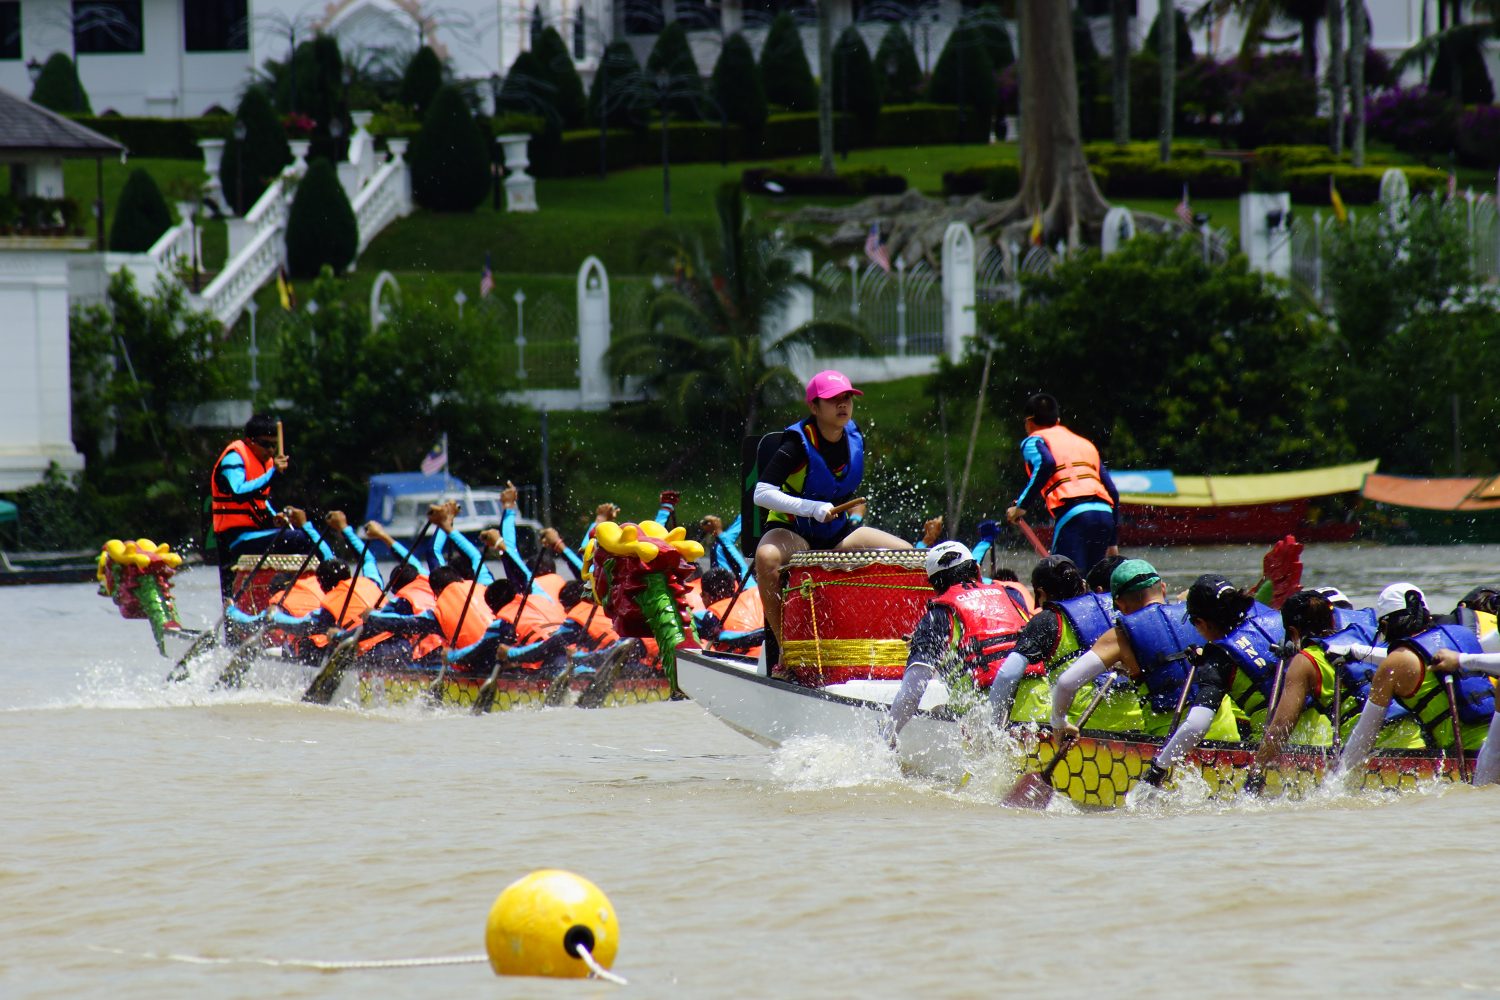 Competitors in action during an earlier edition of the Sarawak International Dragon Boat Regatta. Pic: Ministry of Tourism, Arts &amp; Culture Sarawak